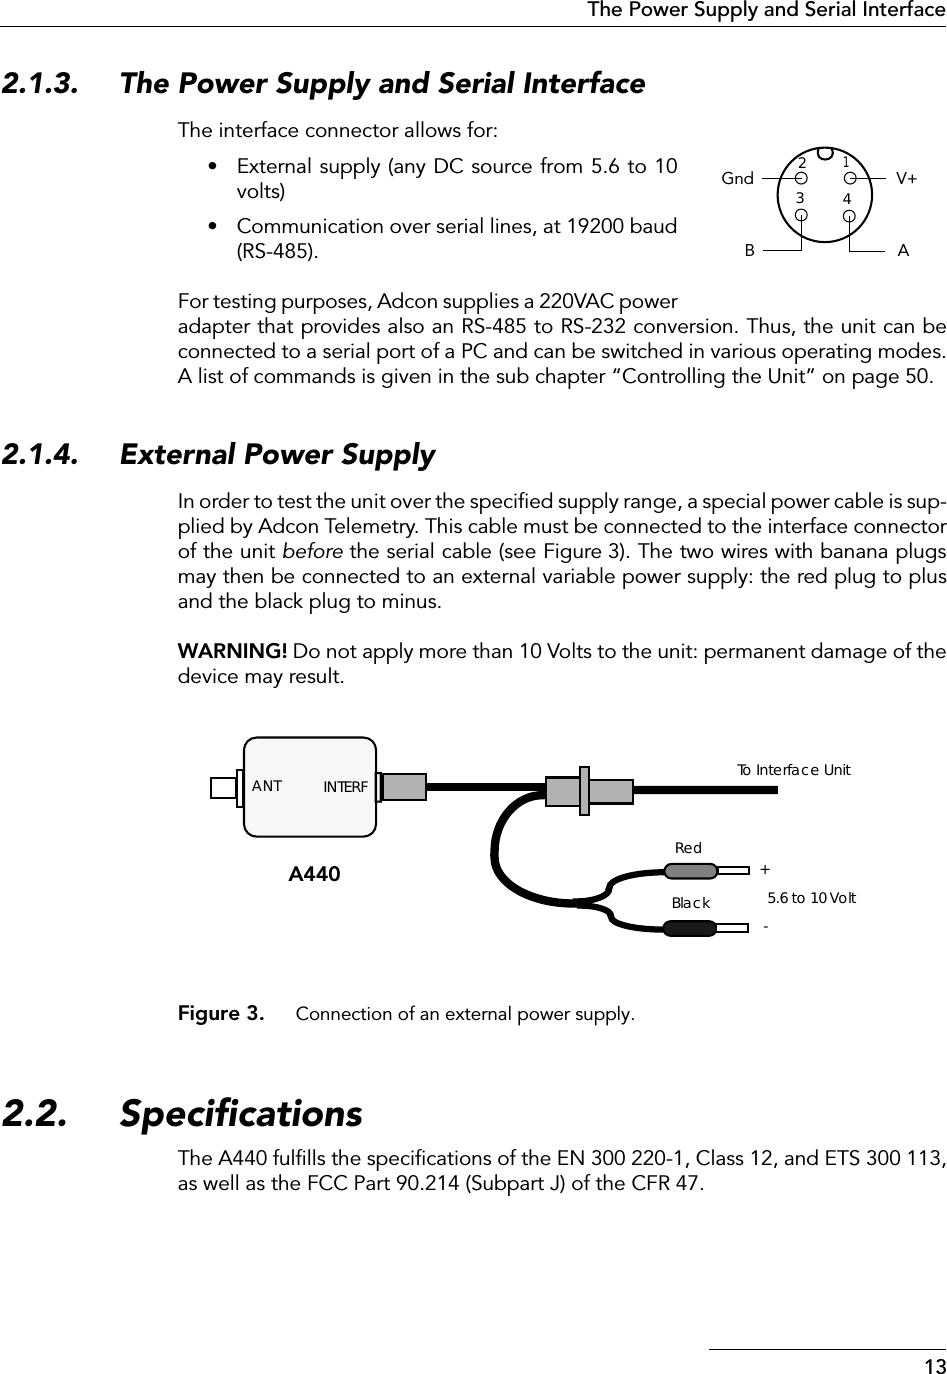  13The Power Supply and Serial Interface 2.1.3. The Power Supply and Serial Interface The interface connector allows for:• External supply (any DC source from 5.6 to 10volts)• Communication over serial lines, at 19200 baud(RS-485).For testing purposes, Adcon supplies a 220VAC poweradapter that provides also an RS-485 to RS-232 conversion. Thus, the unit can beconnected to a serial port of a PC and can be switched in various operating modes.A list of commands is given in the sub chapter “Controlling the Unit” on page 50. 2.1.4. External Power Supply In order to test the unit over the speciﬁed supply range, a special power cable is sup-plied by Adcon Telemetry. This cable must be connected to the interface connectorof the unit  before  the serial cable (see Figure 3). The two wires with banana plugsmay then be connected to an external variable power supply: the red plug to plusand the black plug to minus.  WARNING!  Do not apply more than 10 Volts to the unit: permanent damage of thedevice may result. Figure 3. Connection of an external power supply. 2.2. Speciﬁcations The A440 fulﬁlls the speciﬁcations of the EN 300 220-1, Class 12, and ETS 300 113,as well as the FCC Part 90.214 (Subpart J) of the CFR 47.1234V+BAGndINTERF+-BlackRed5.6 to 10 VoltANT To Interface UnitA440